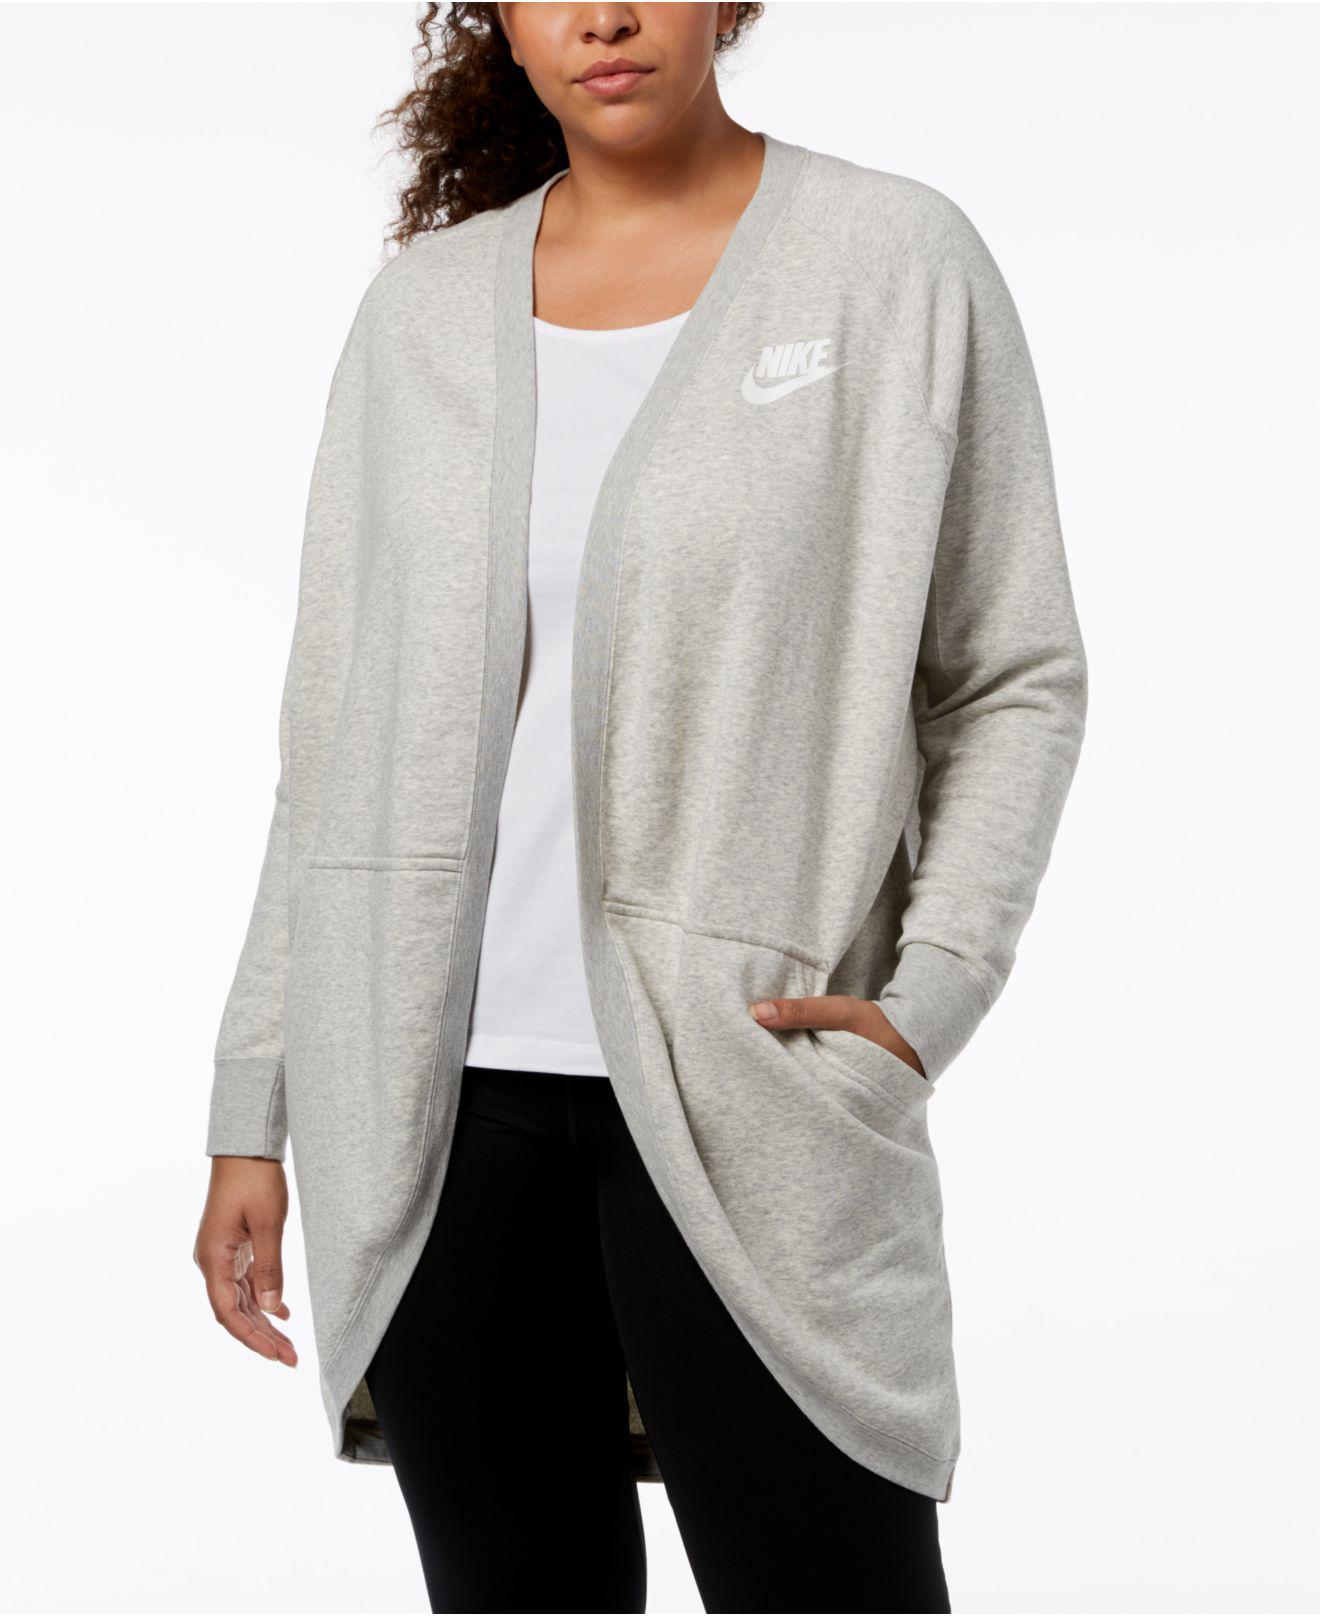 Nike Plus Rib Extended Cardigan (grey Heather/pale Grey/white) Sweater in Gray |